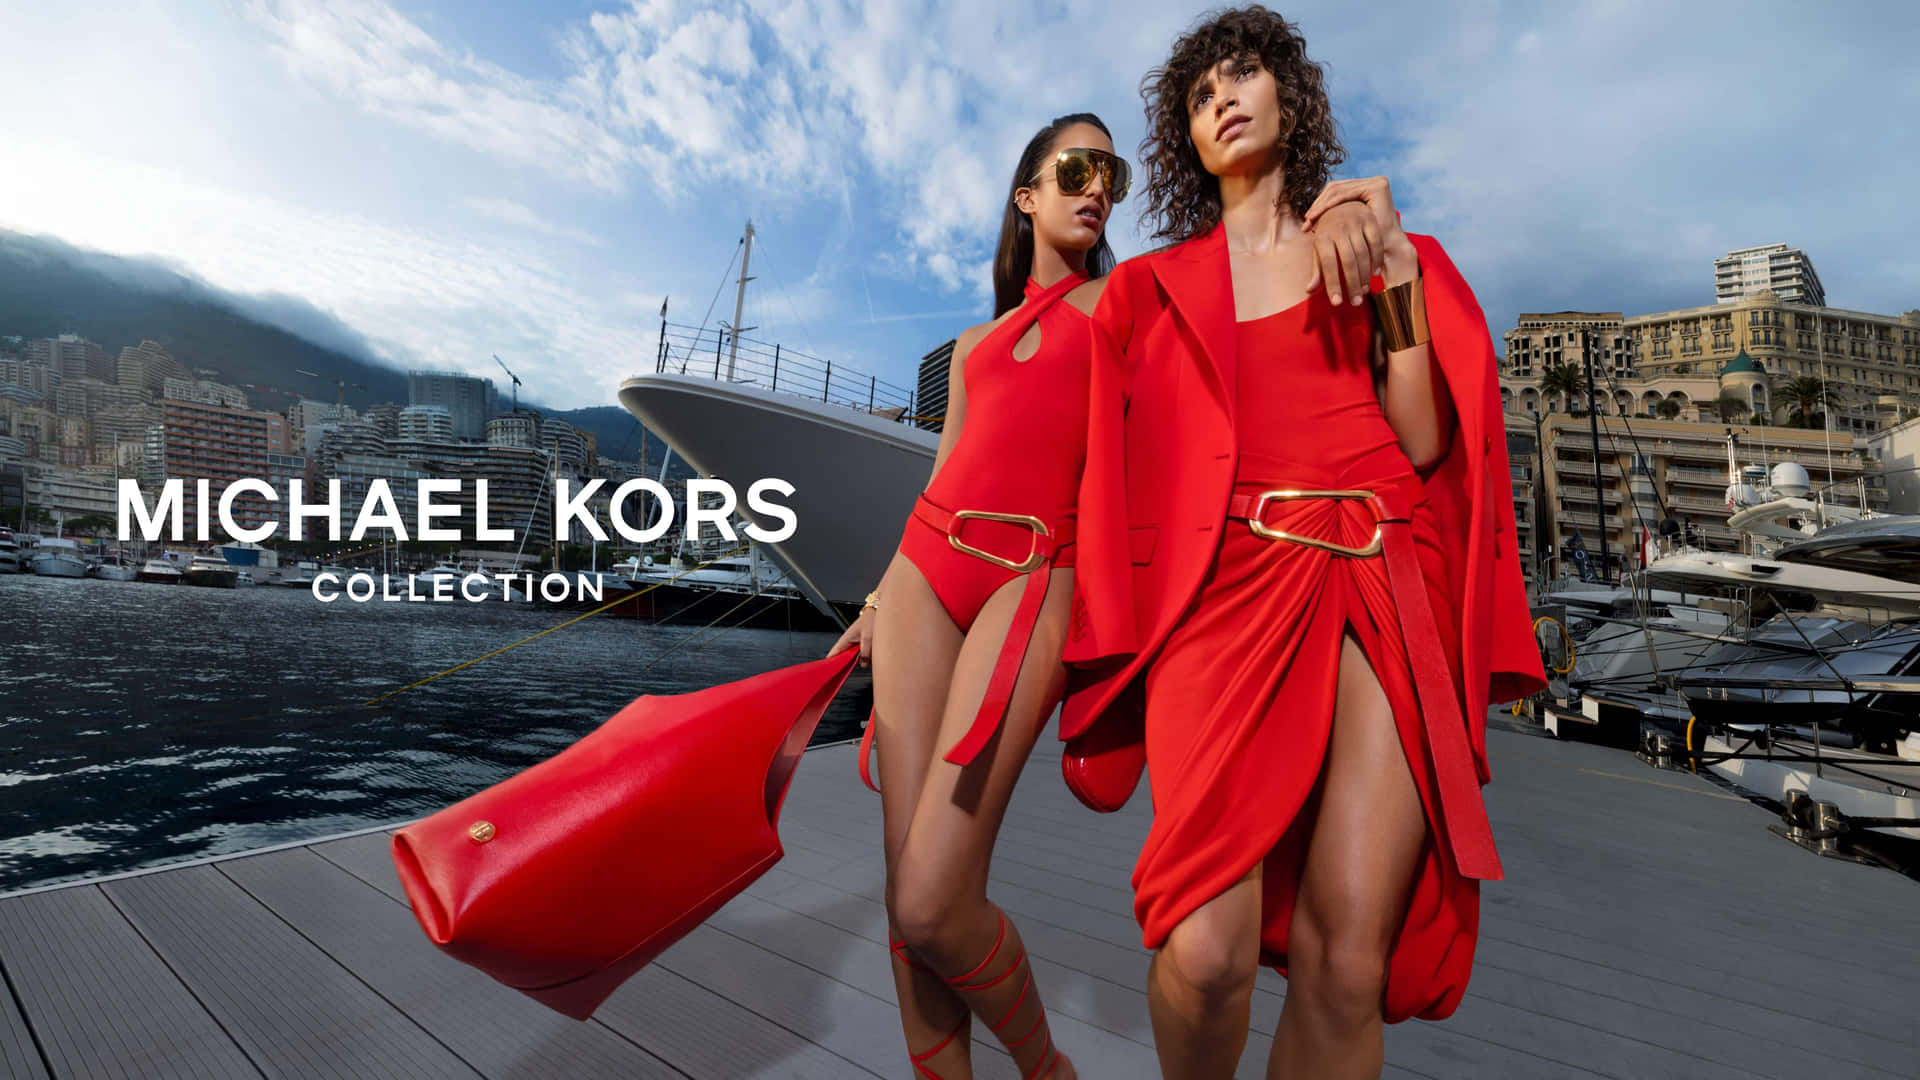 Experience the Freedom of Michael Kors